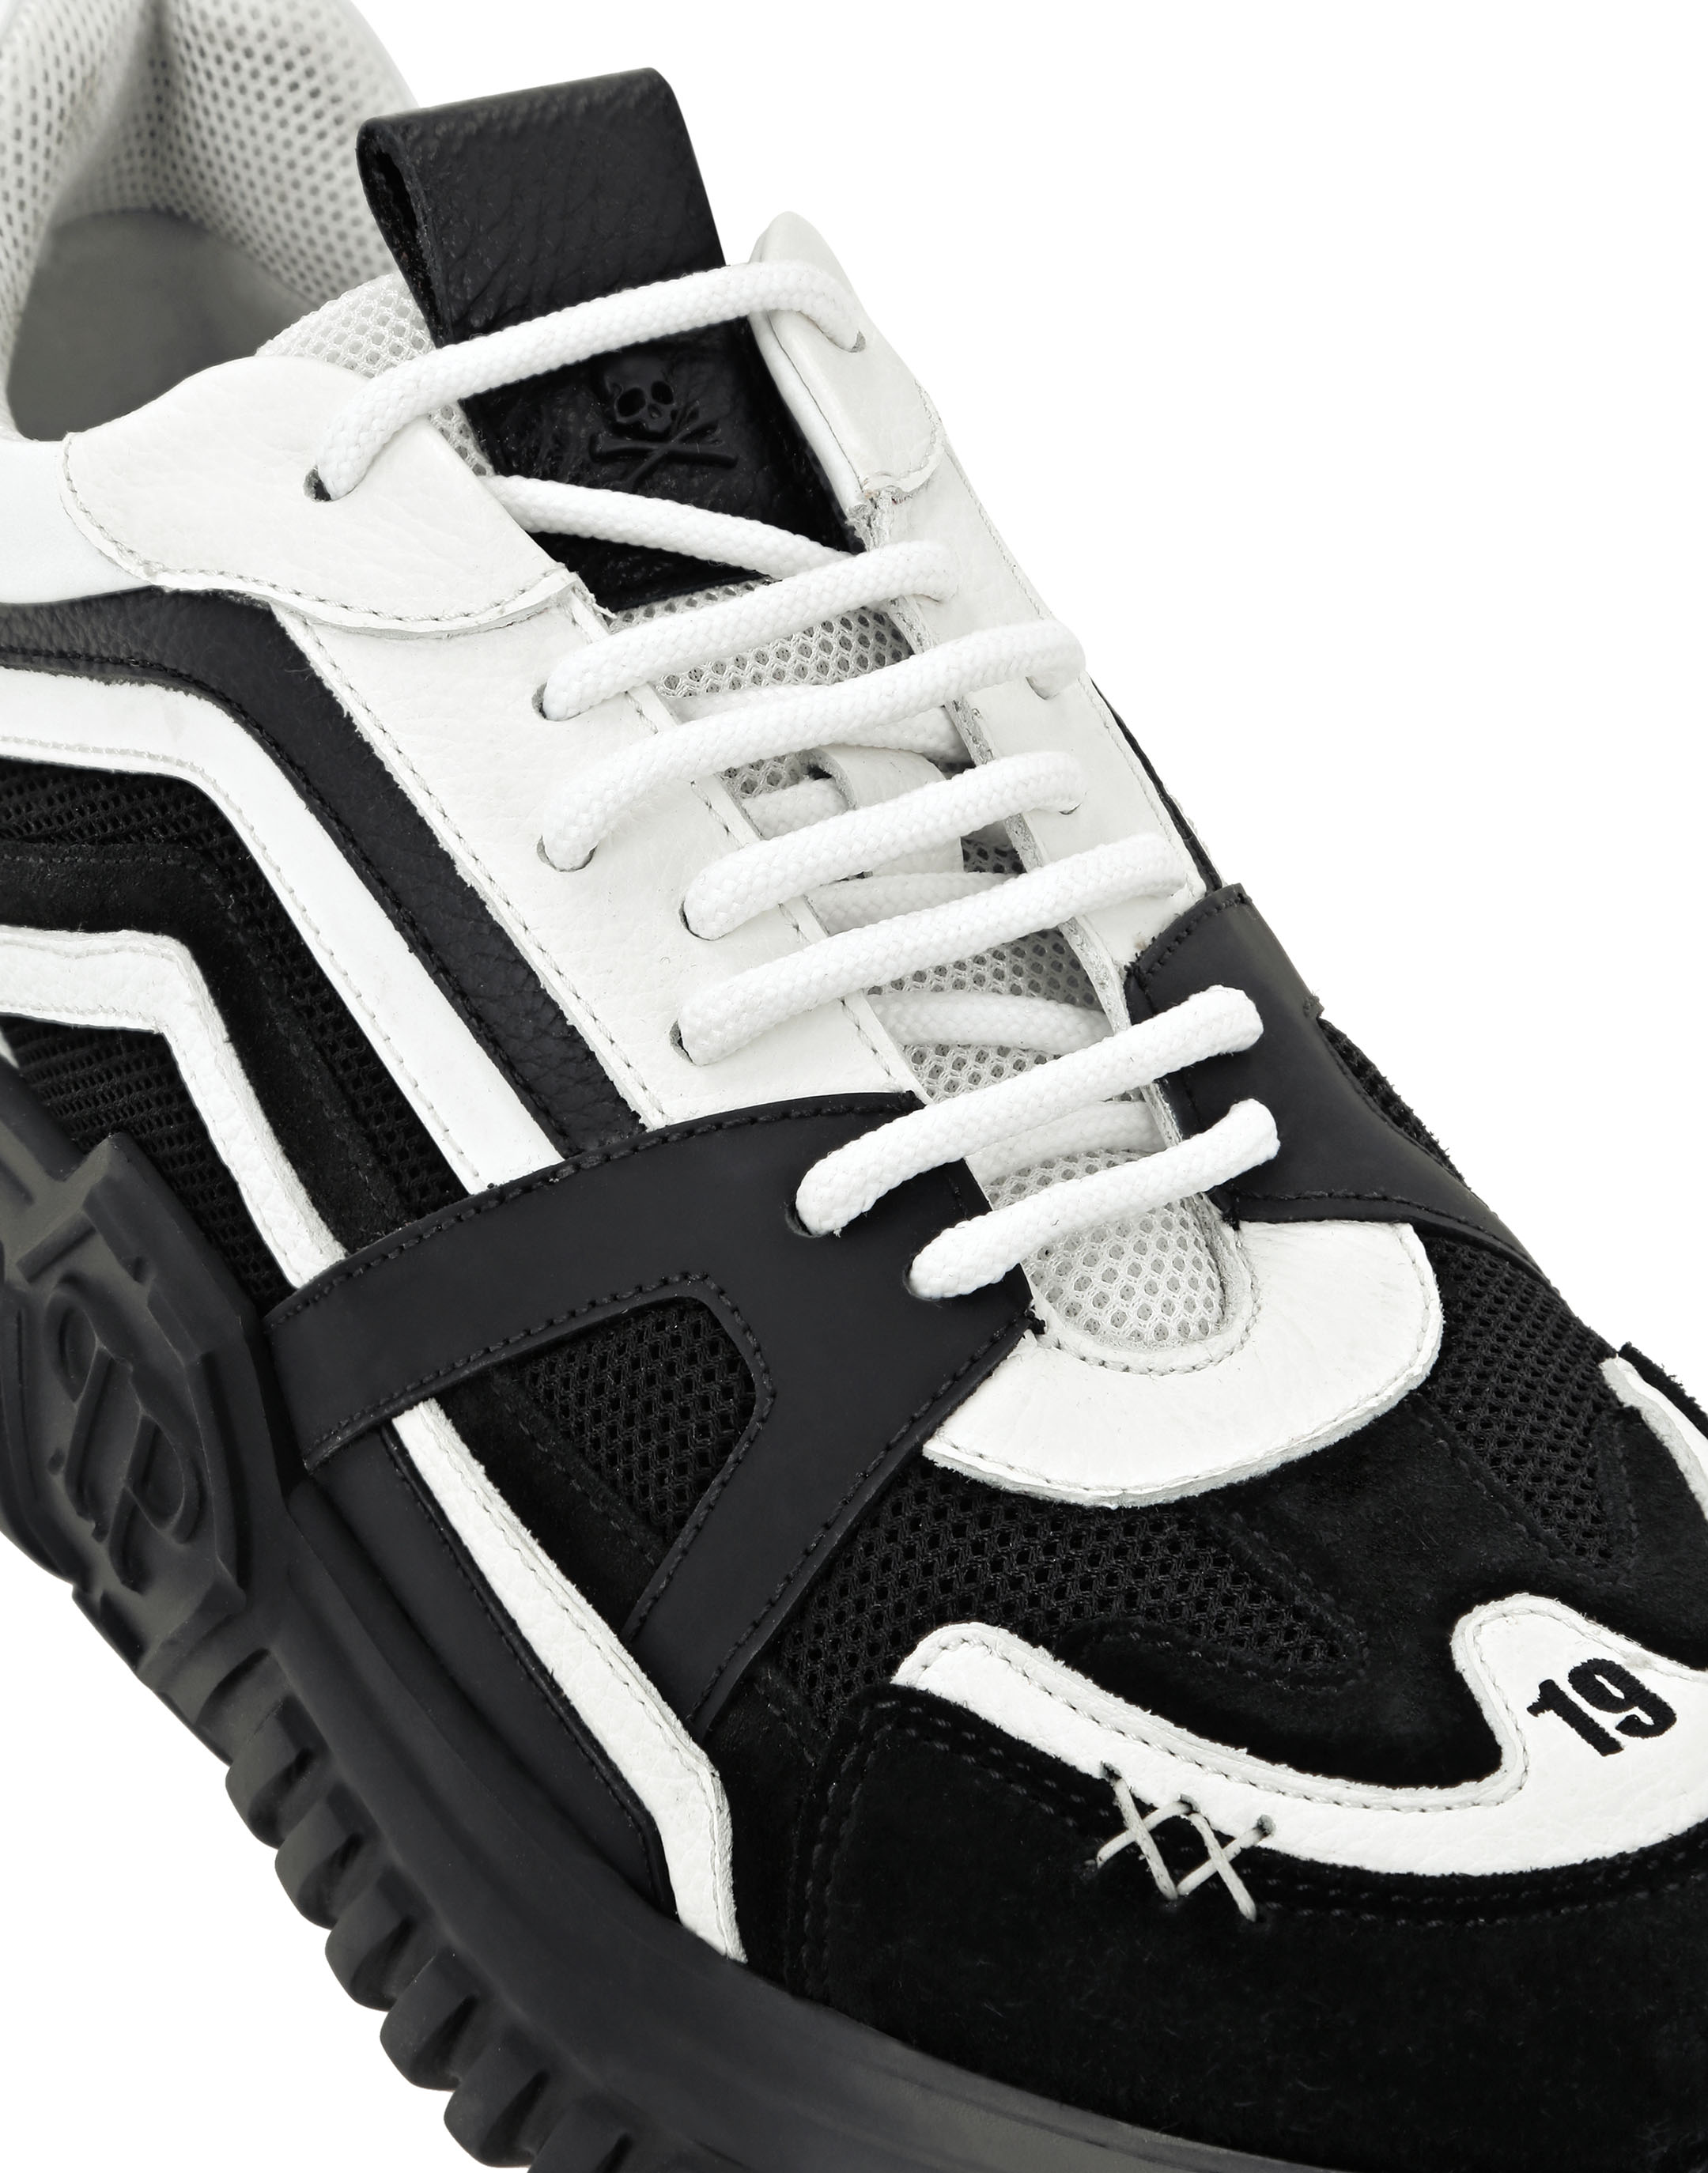 RUNNER SNEAKERS SUPERSONIC | Philipp Plein Outlet